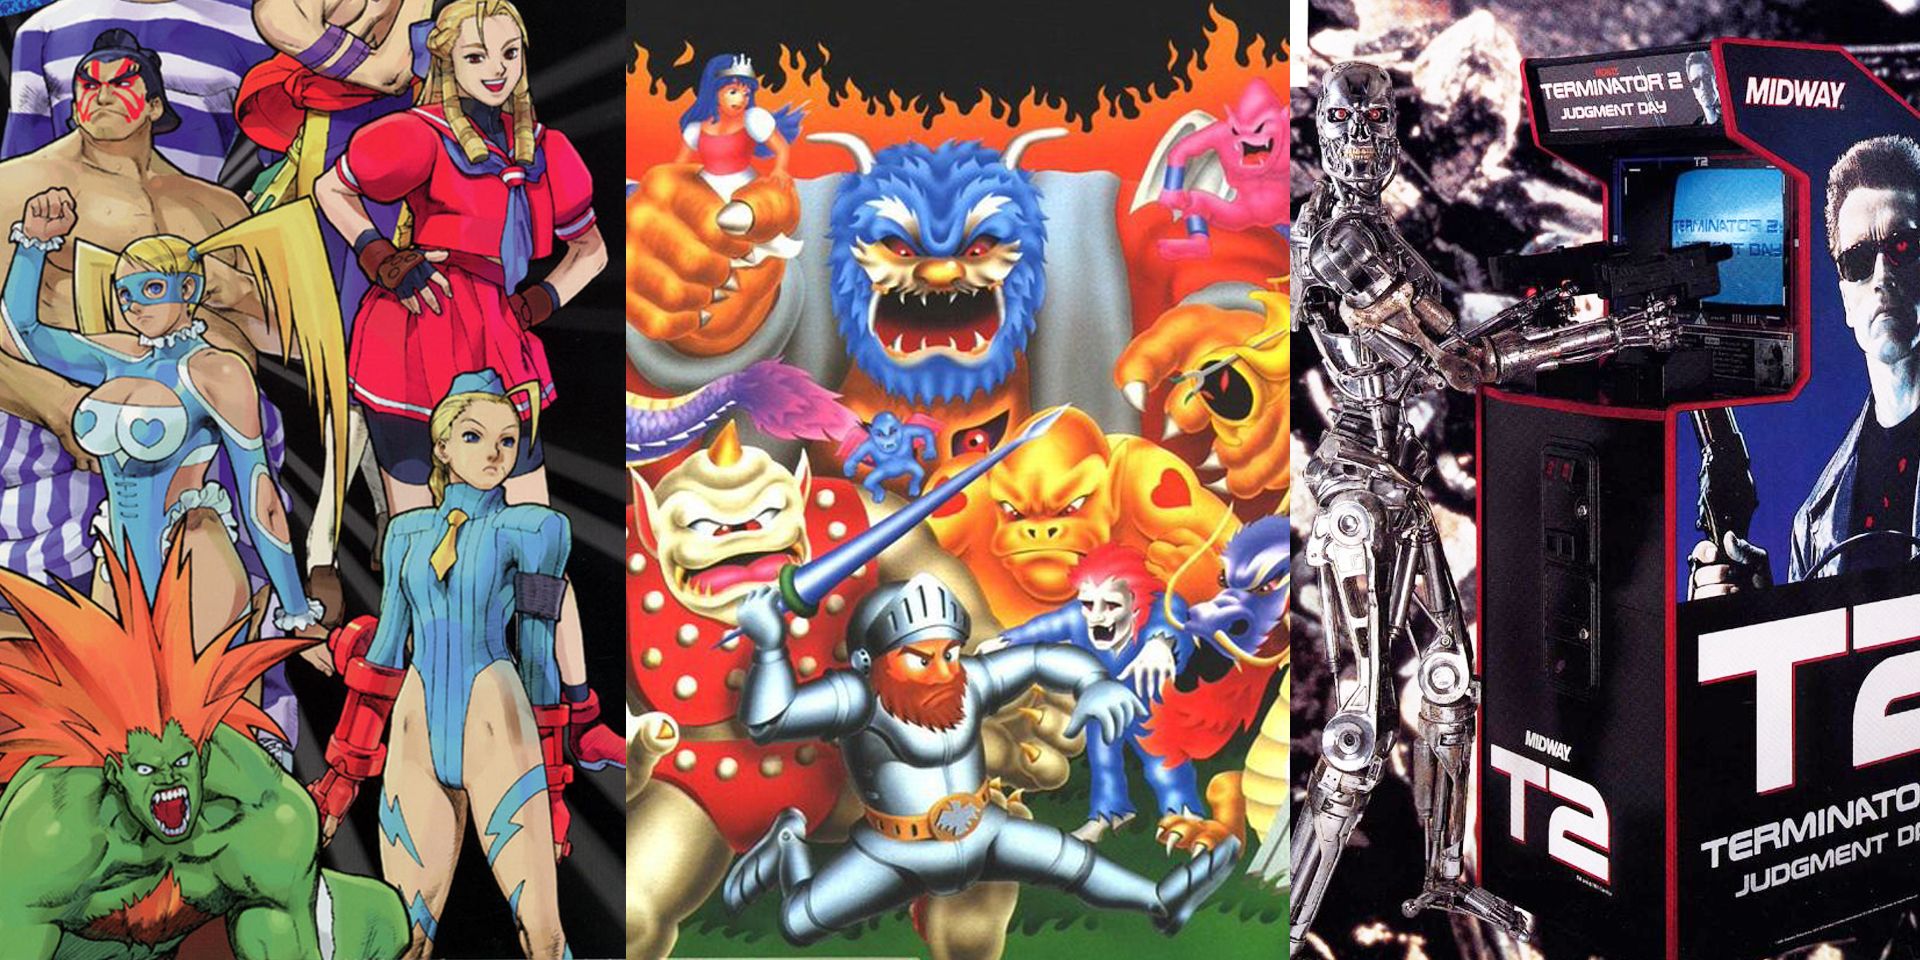 A collage of classic arcade titles.